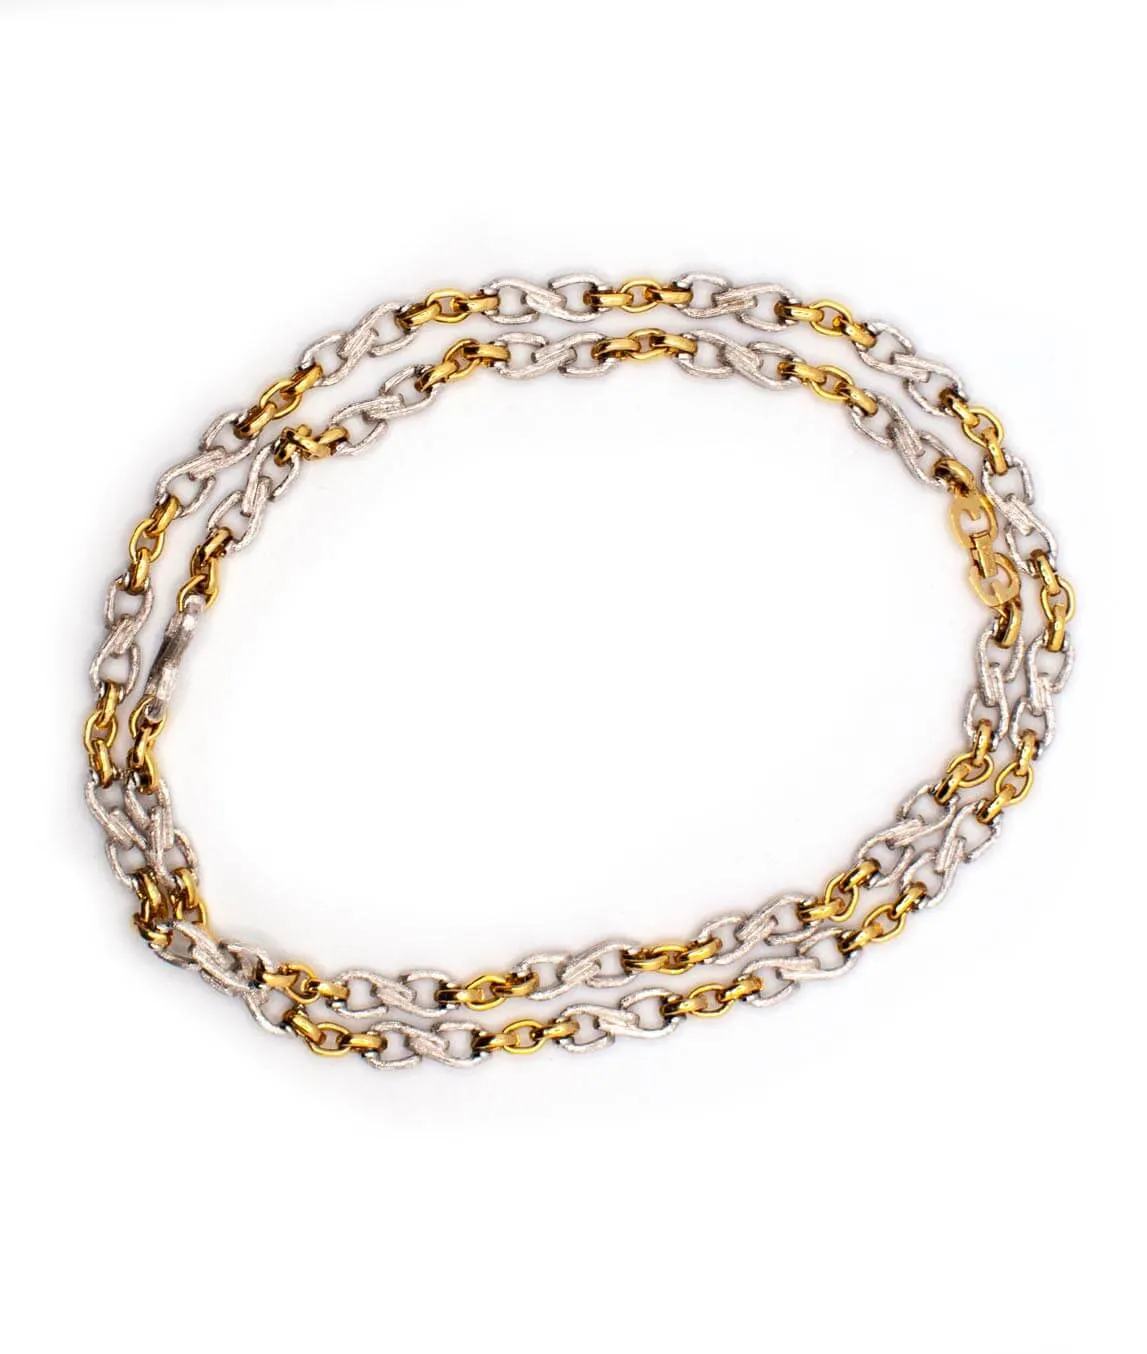 Silver and gold coloured heavy link chain by Grossé